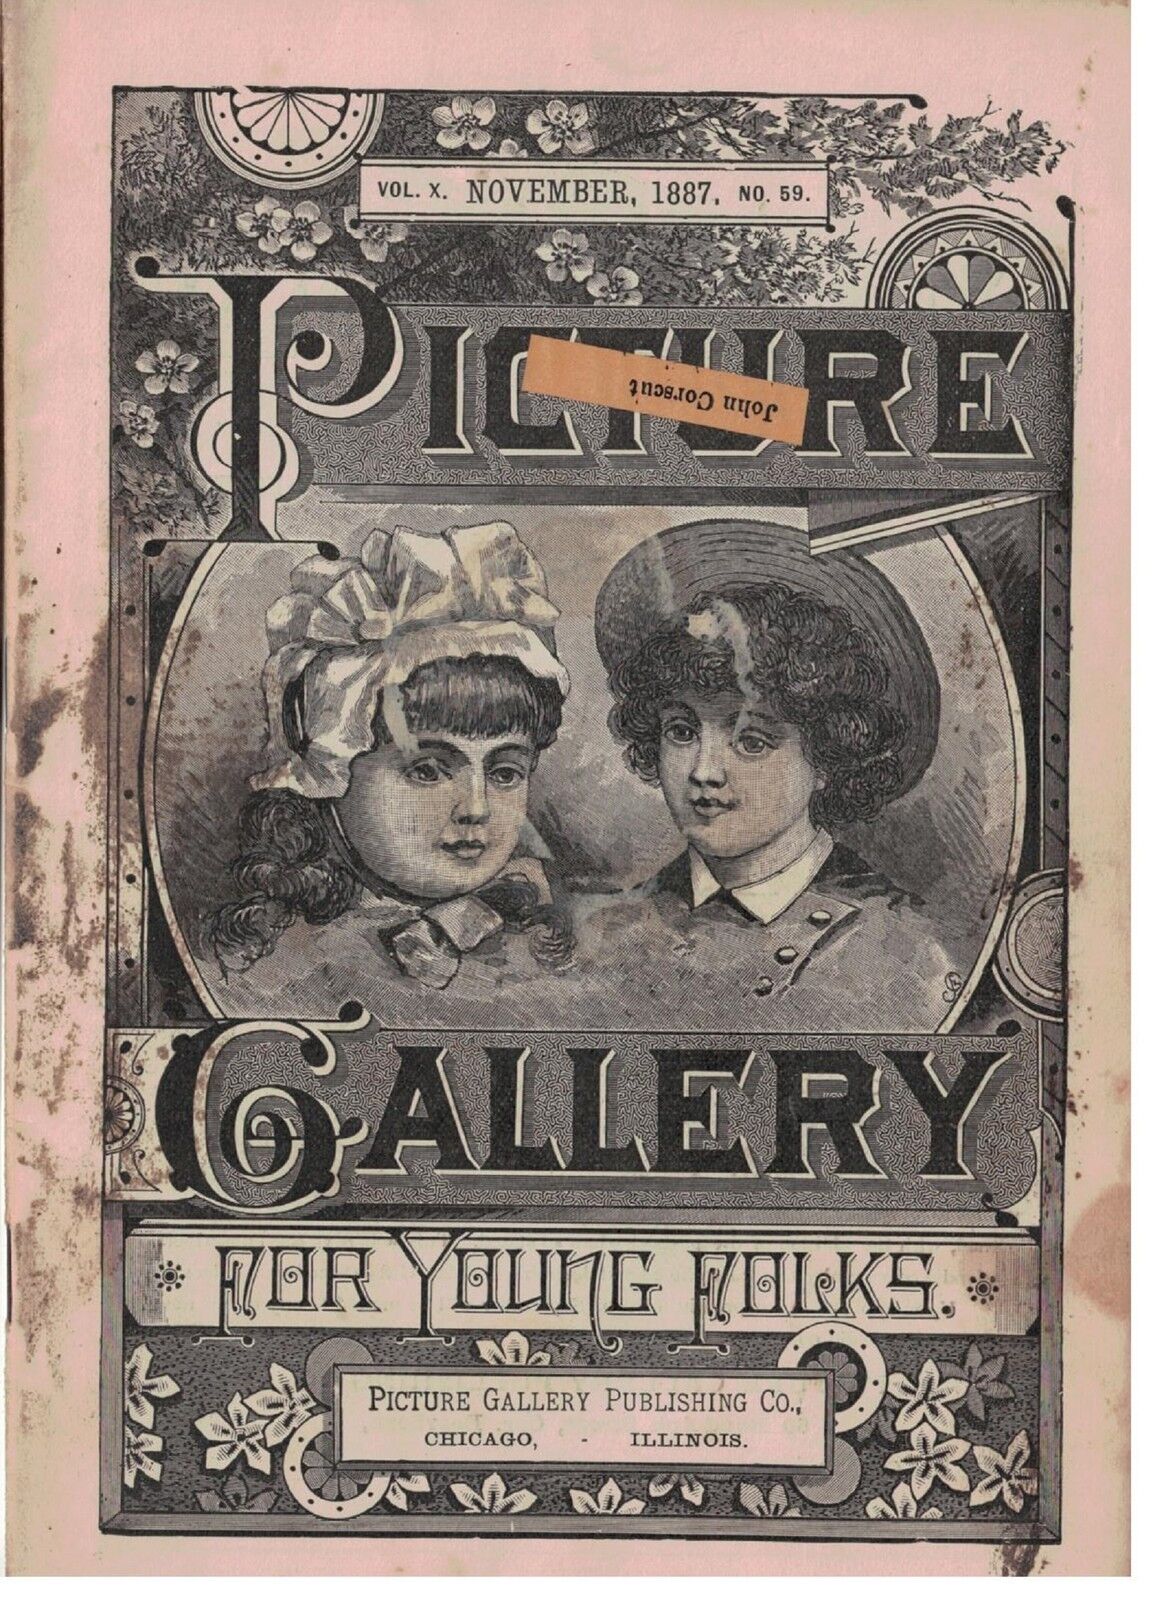 Nov 1887 issue of Picture Gallery Magazine for Young Folks